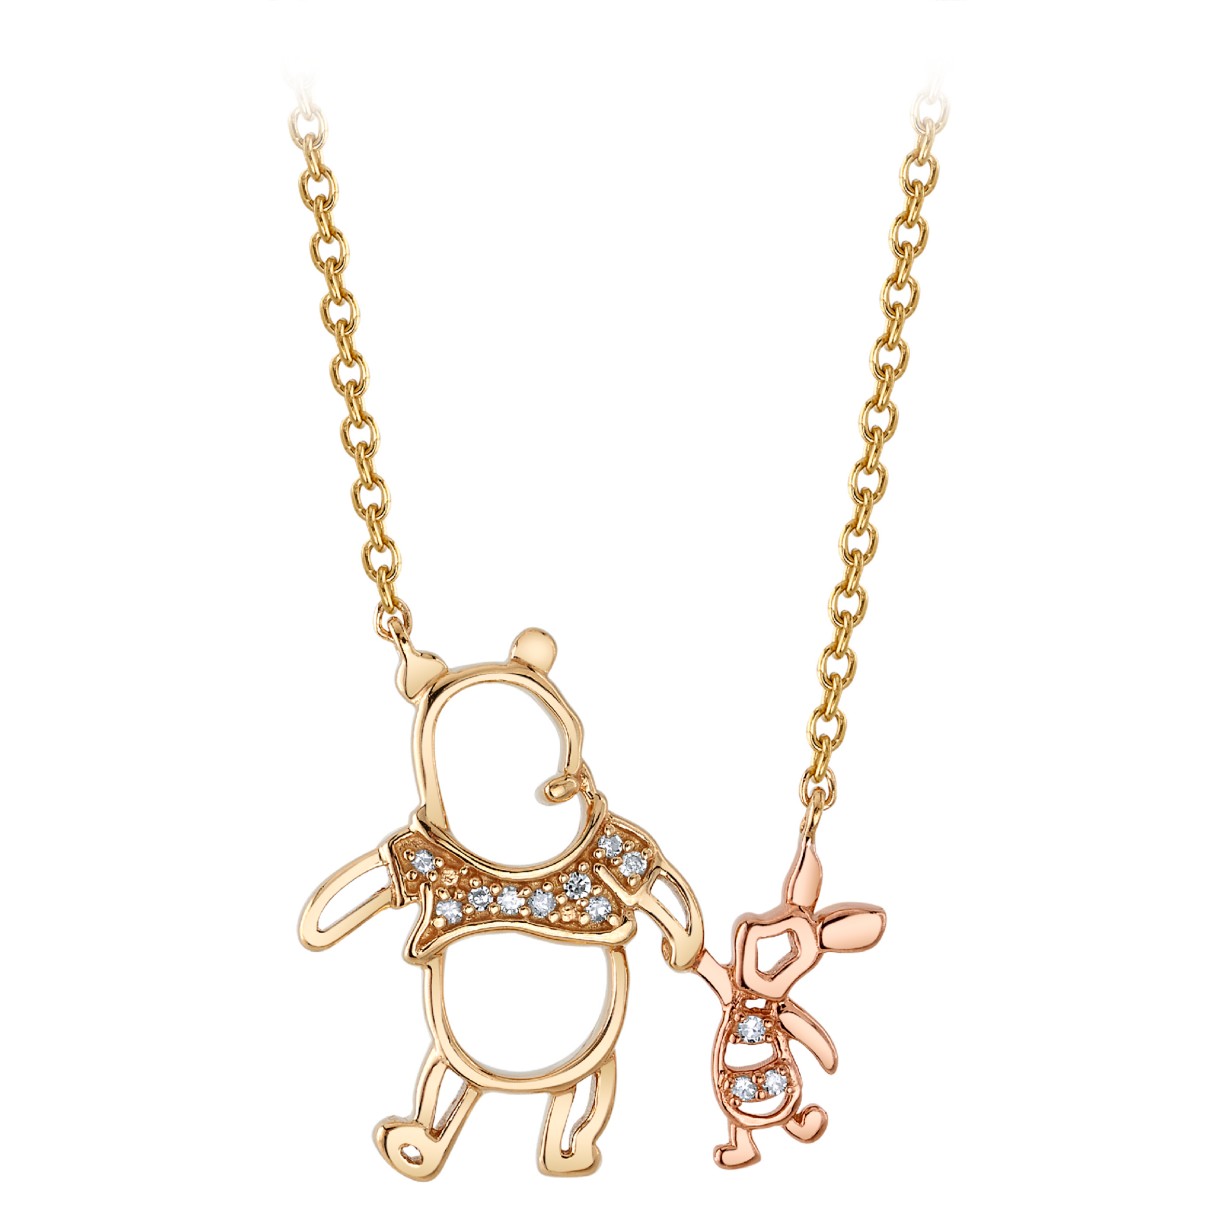 Winnie the Pooh and Piglet Diamond Necklace | shopDisney